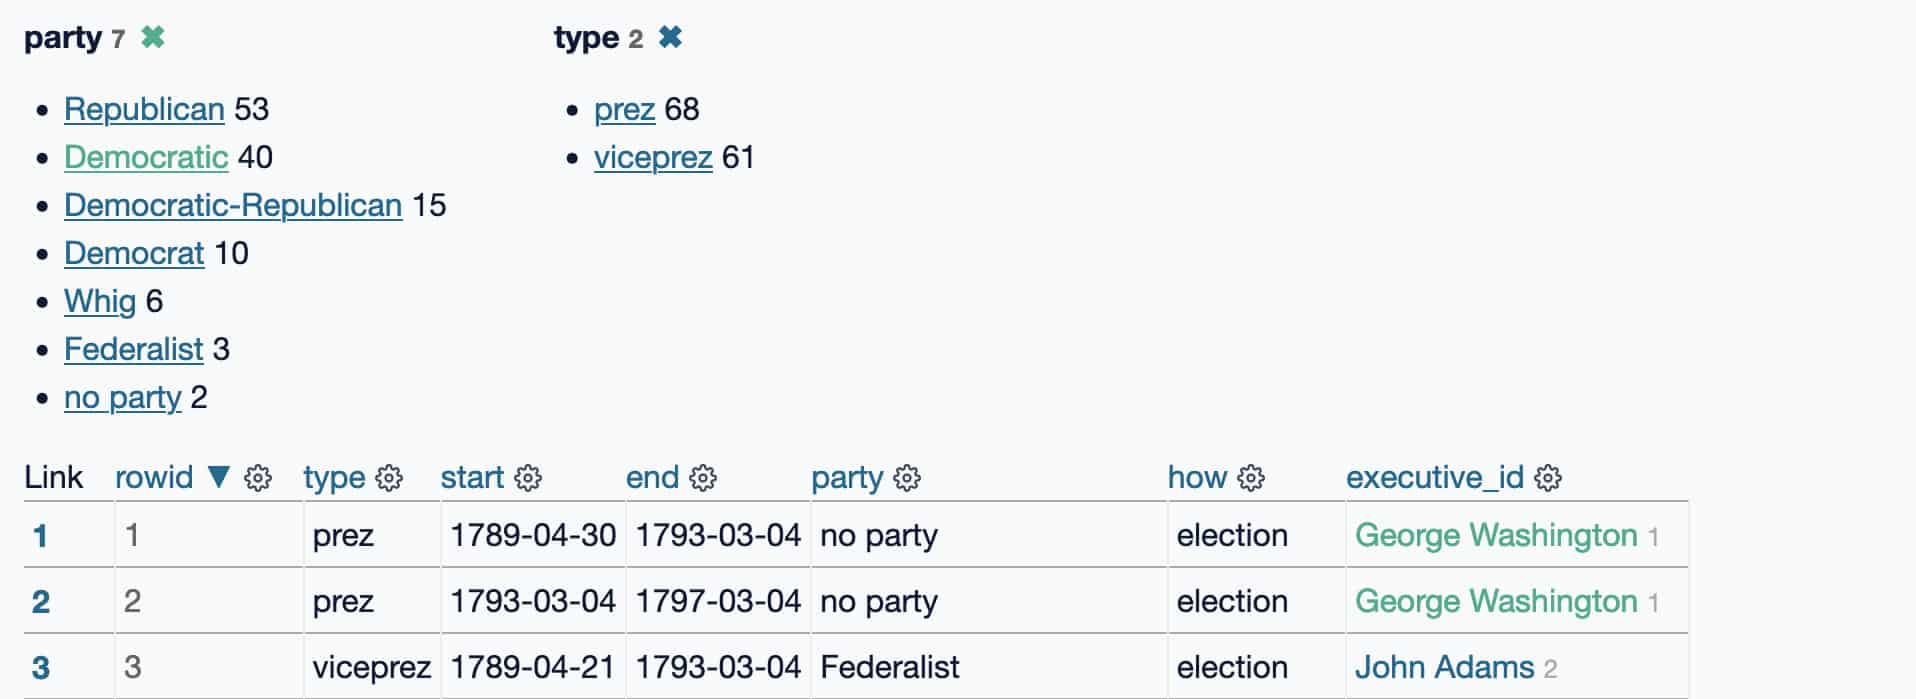 Facets show as two lists above the table - one of parties and one of types, where the types are prez or viceprez